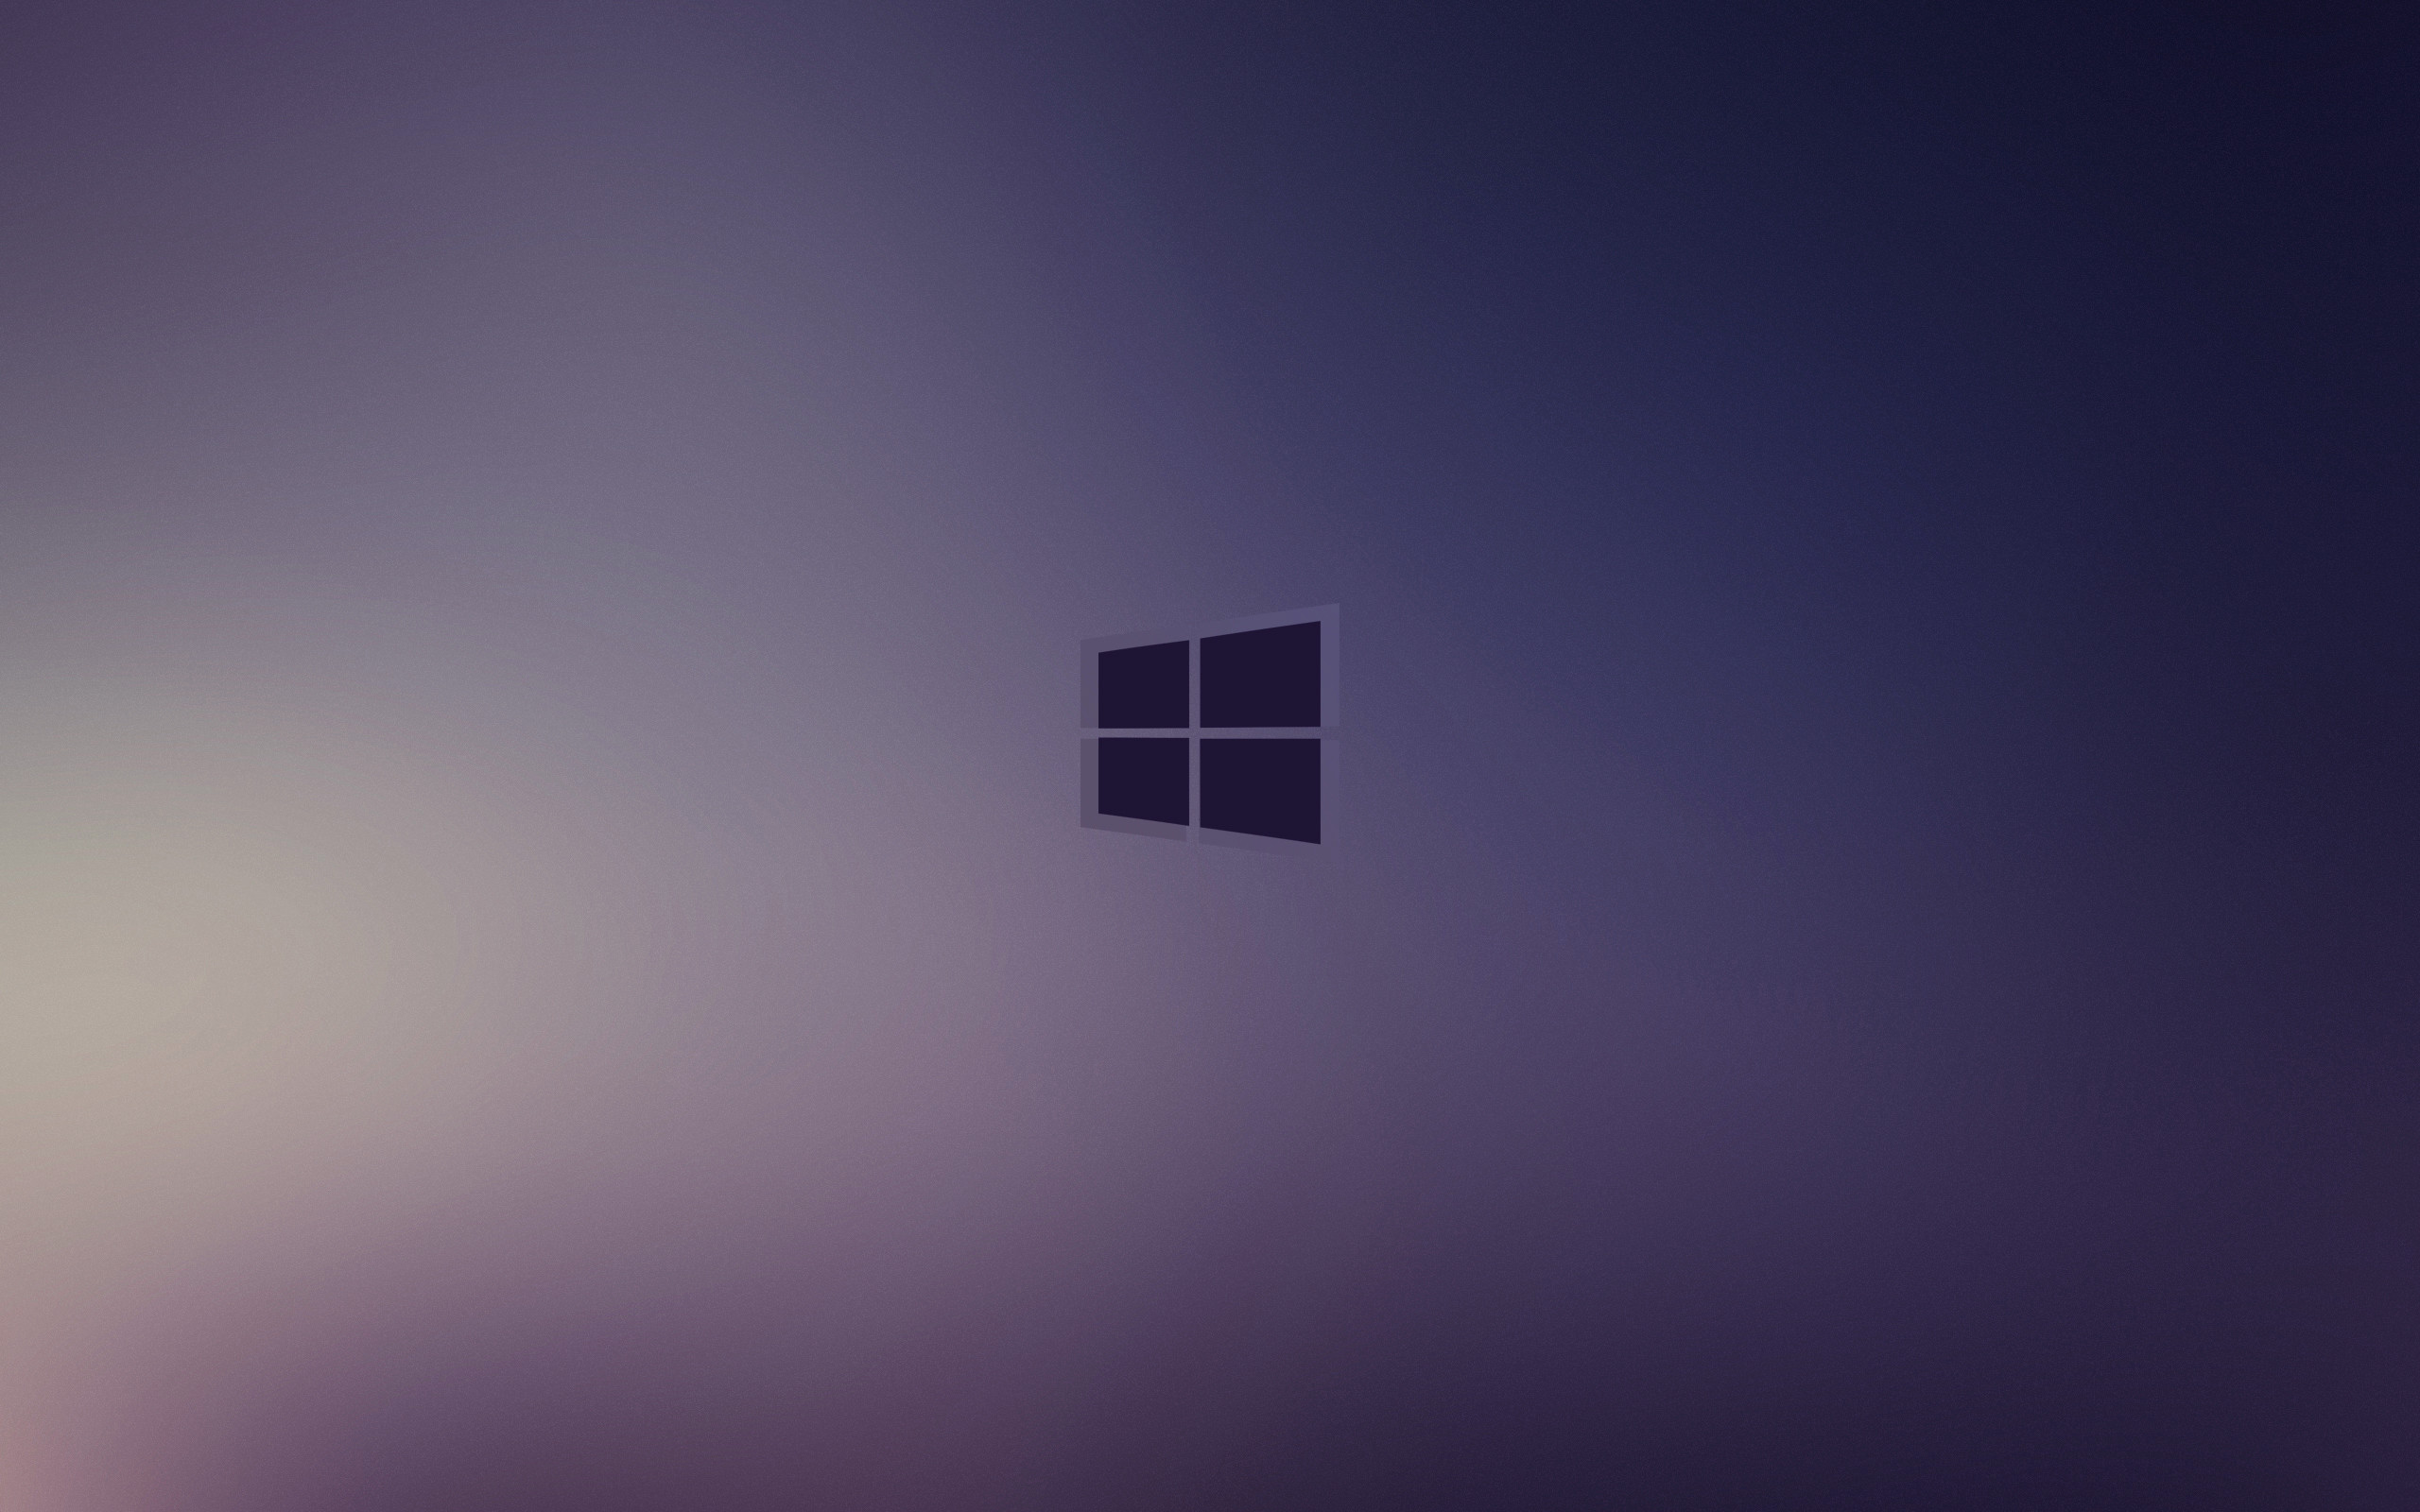 Live Wallpapers for Windows 10 (54+ images)